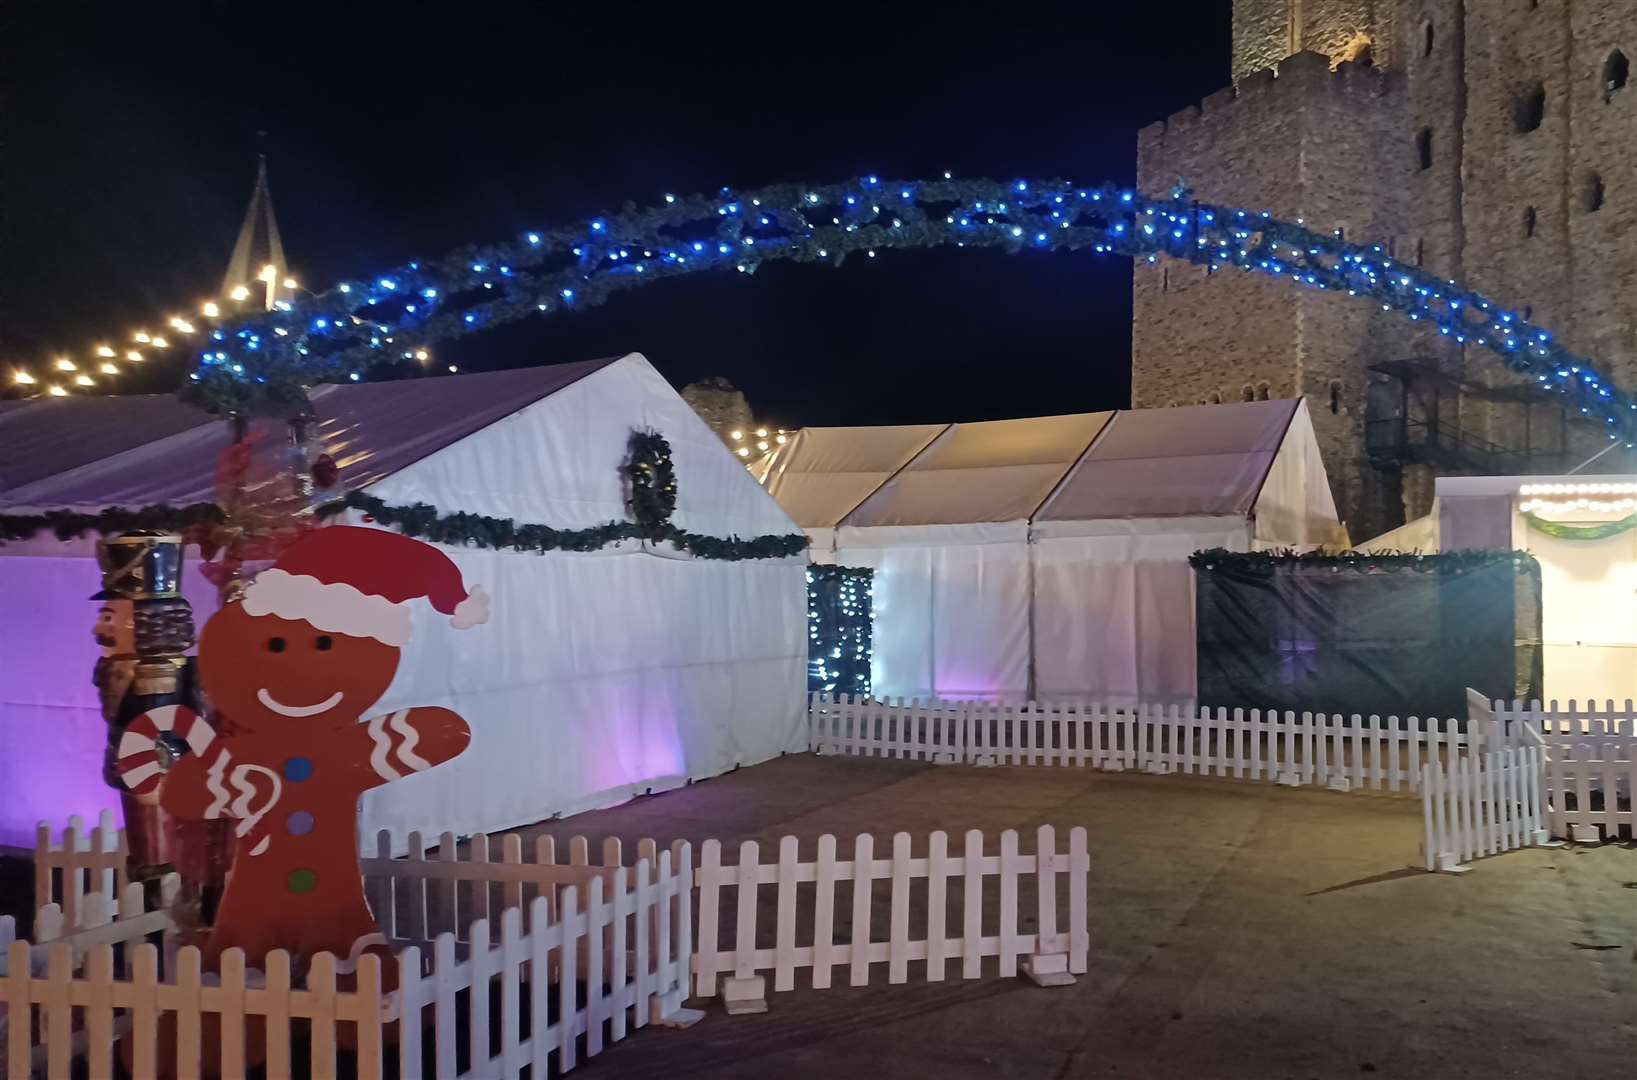 Get crafty at the Children's Christmas Village, which can be found inside the Rochester Market